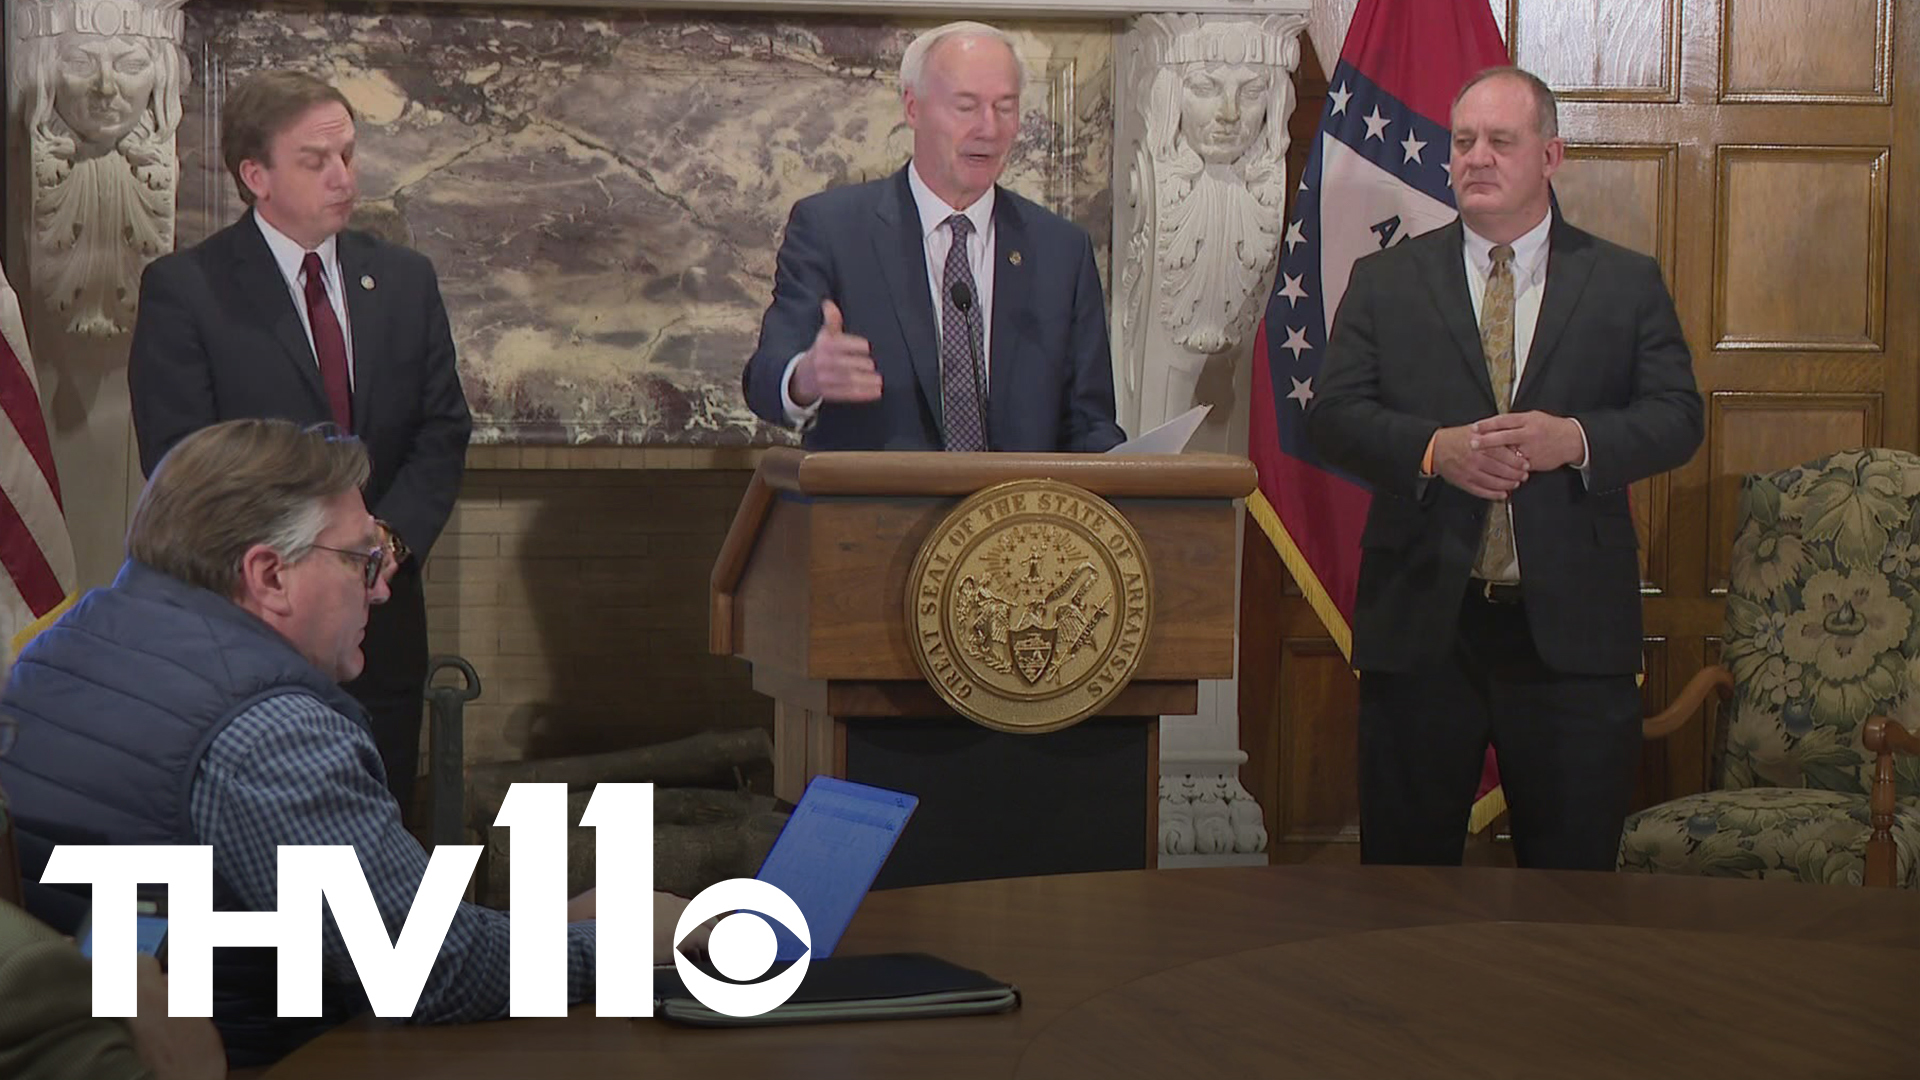 Hutchinson stated that the bill would put the safety of Arkansas "at risk."